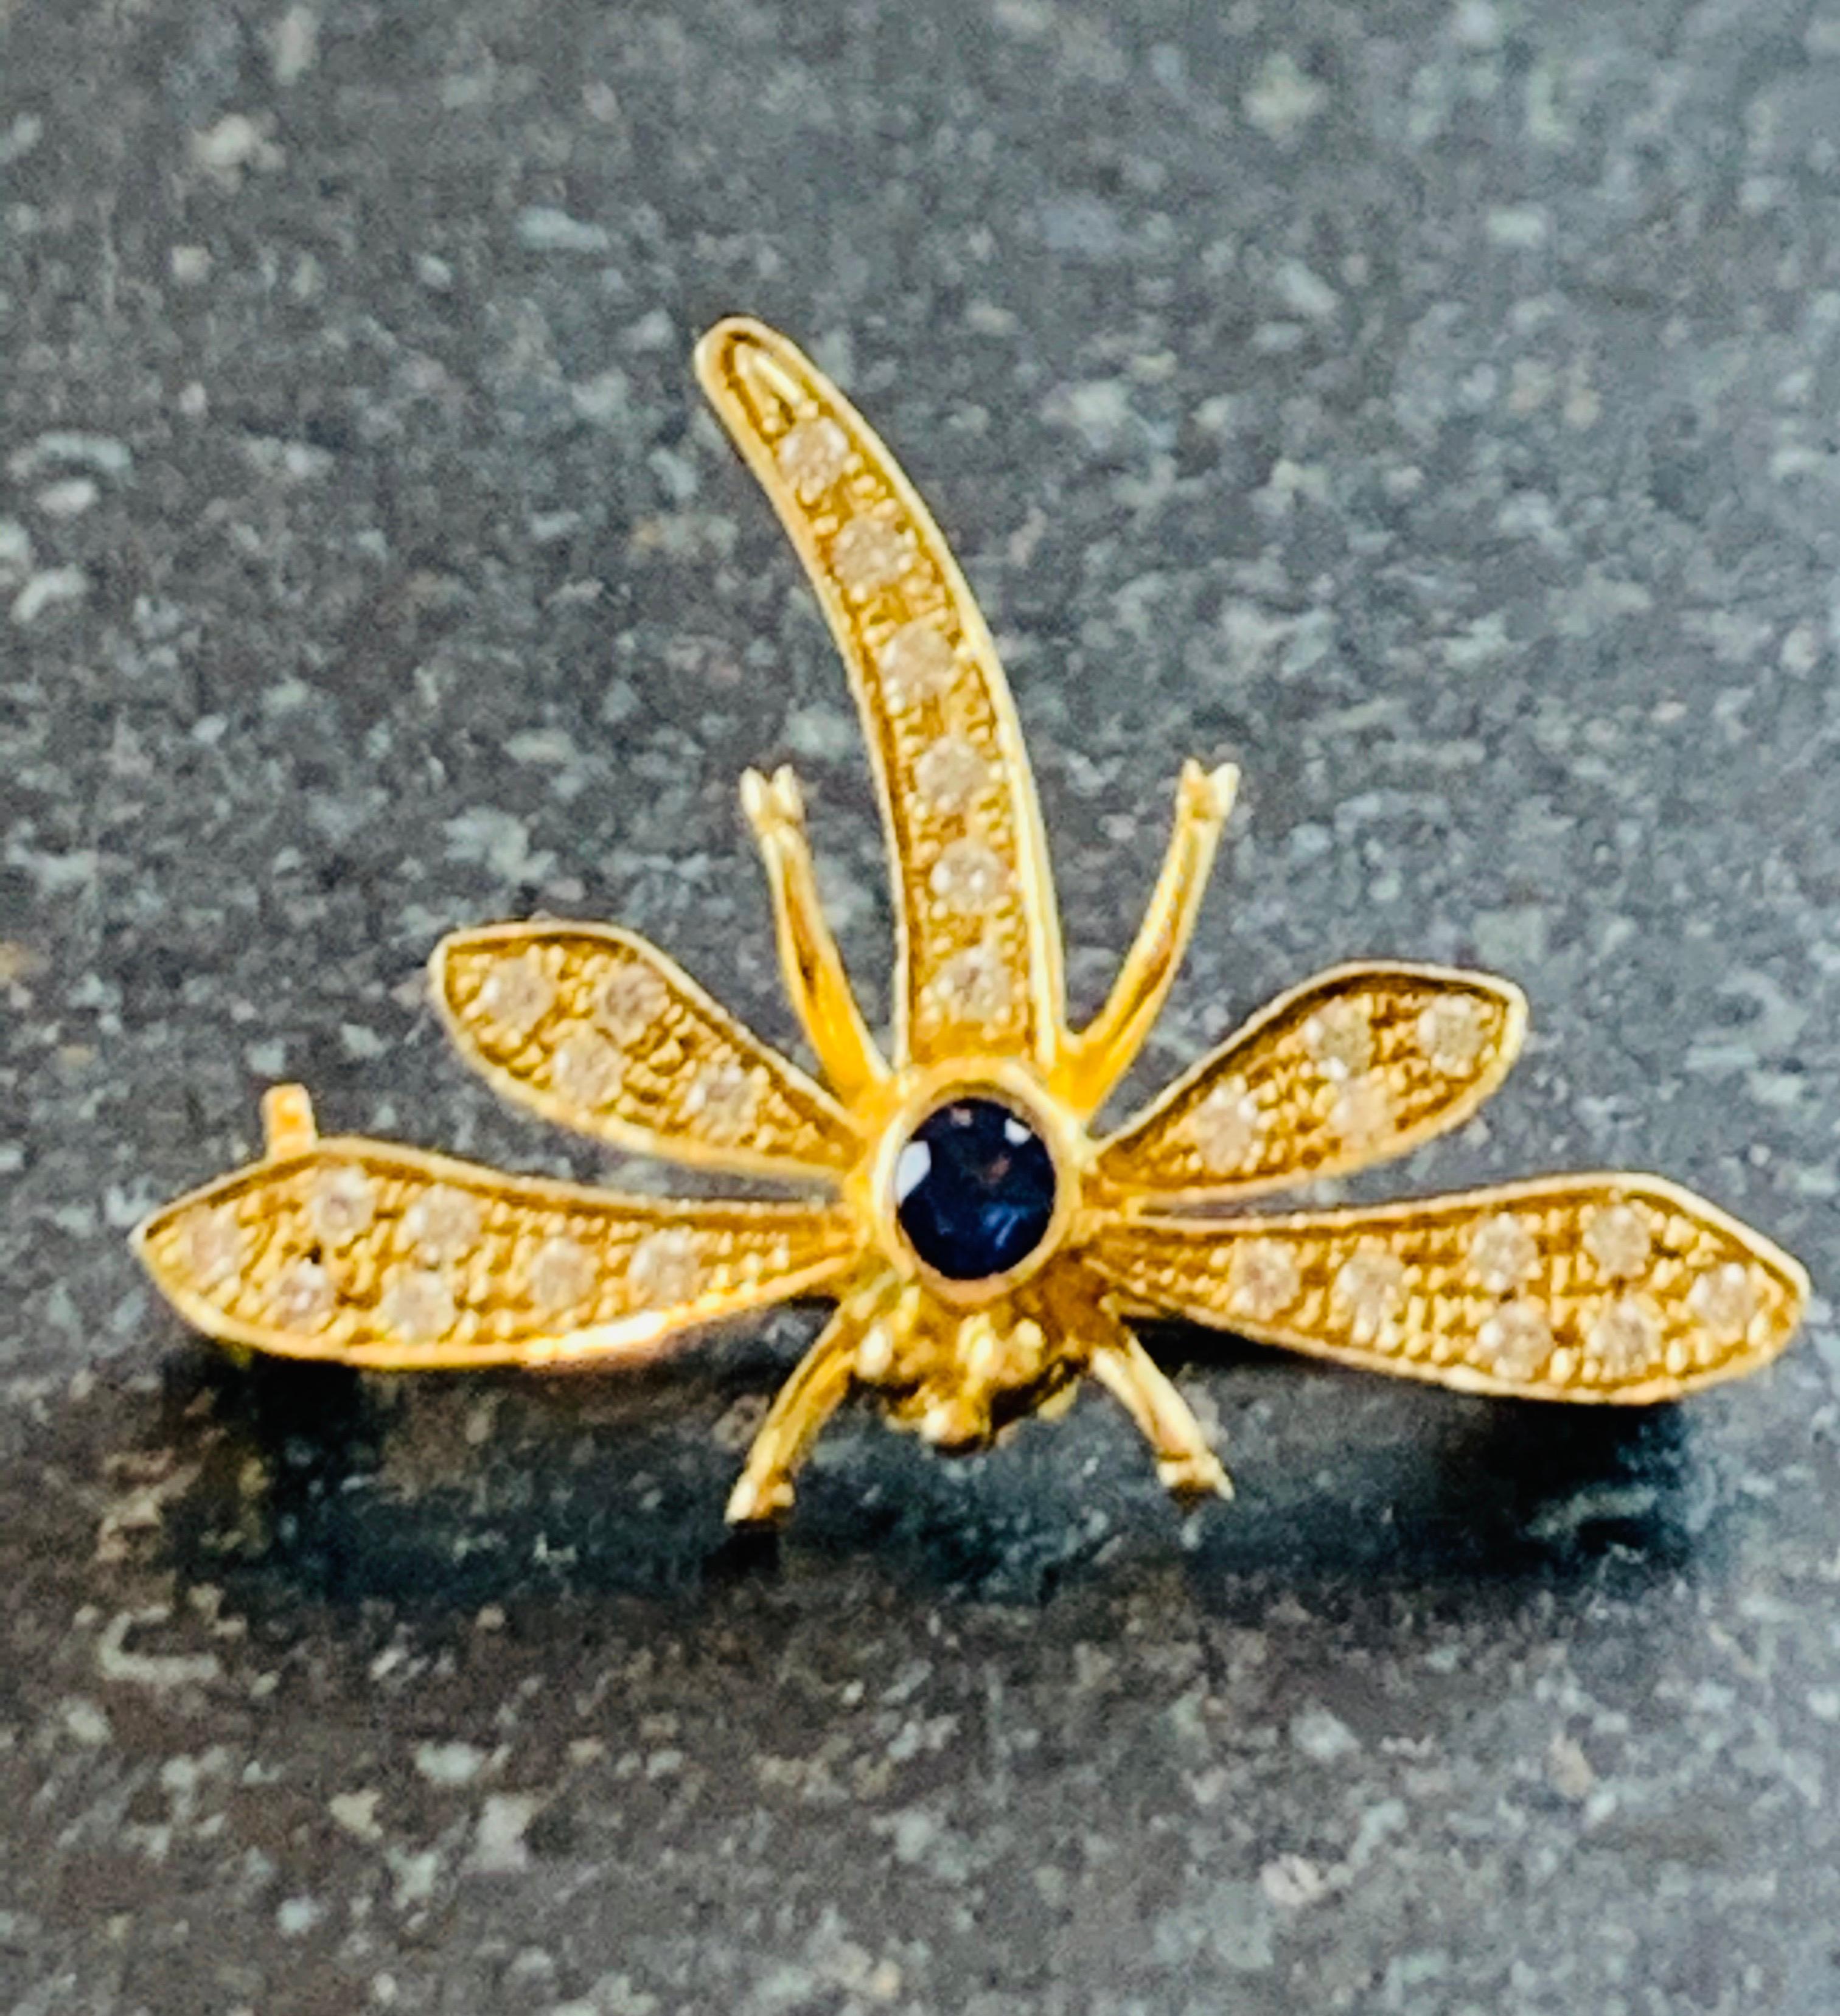 Charming Detailed 18 Karat Yellow Gold and Brilliant White Cut Diamond Dragonfly Booch With Blue Sapphire. Approximately 0.75ct diamonds. Gold Pin With Clasp On Rear Which Makes It Easy And Safe To Wear. A Wondefully Charming European Brooch. 